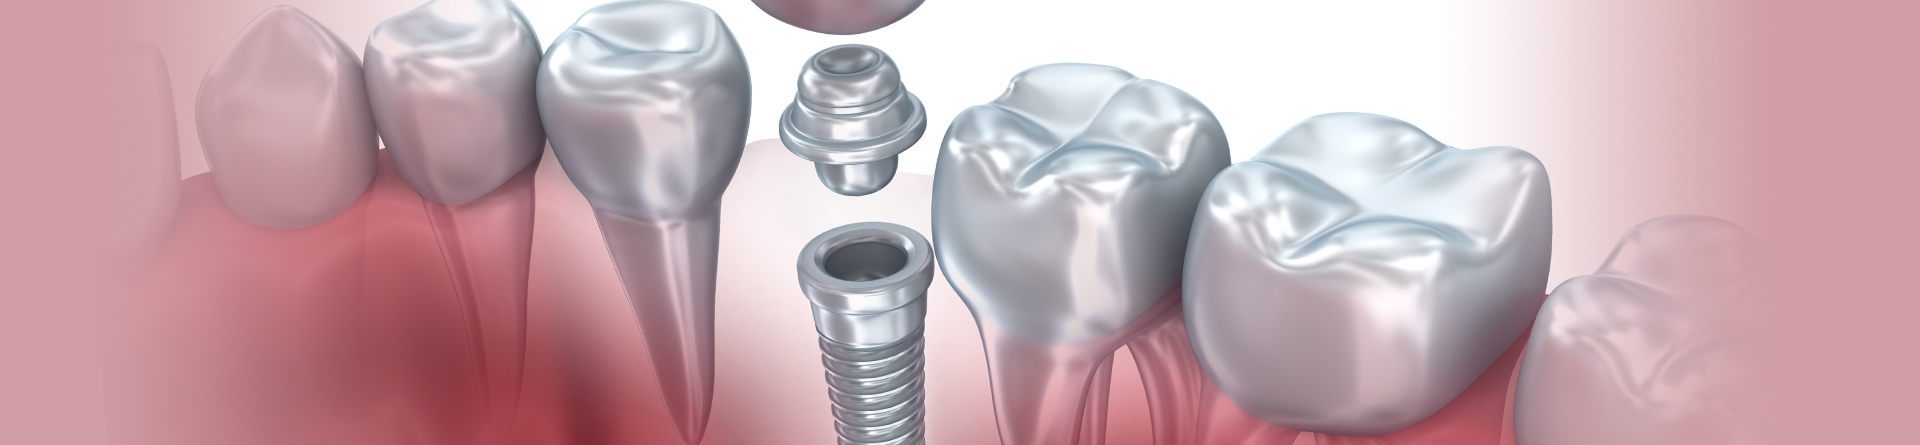 Dental Implants Services at South Lakewood Dental Doing nice tooth restorations